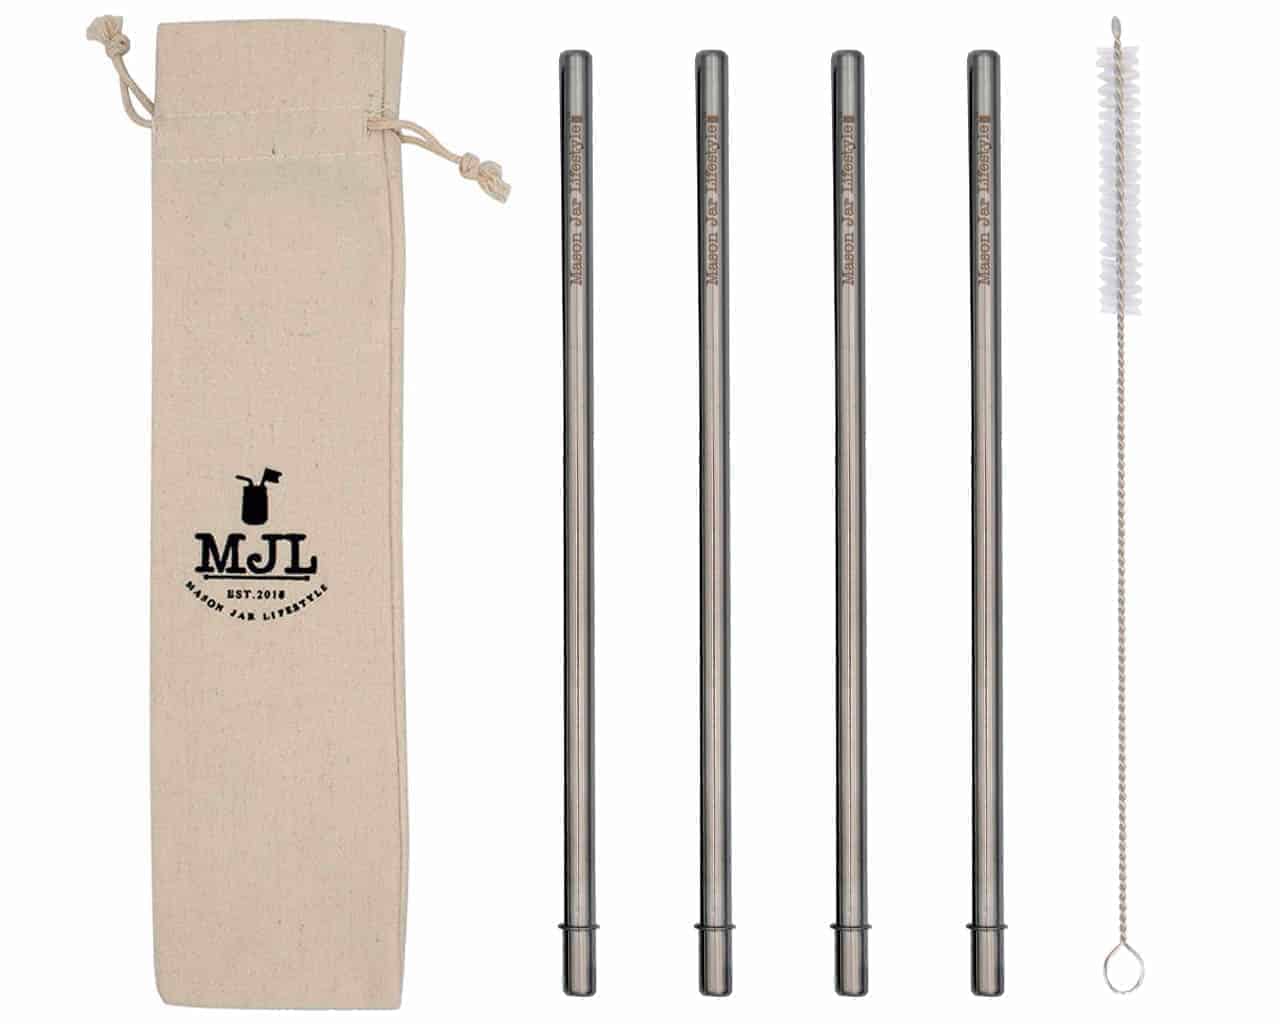 Mason Jar Lifestyle Long safer stainless steel metal straws for quart 32oz Mason jars, large cups, and tall glasses